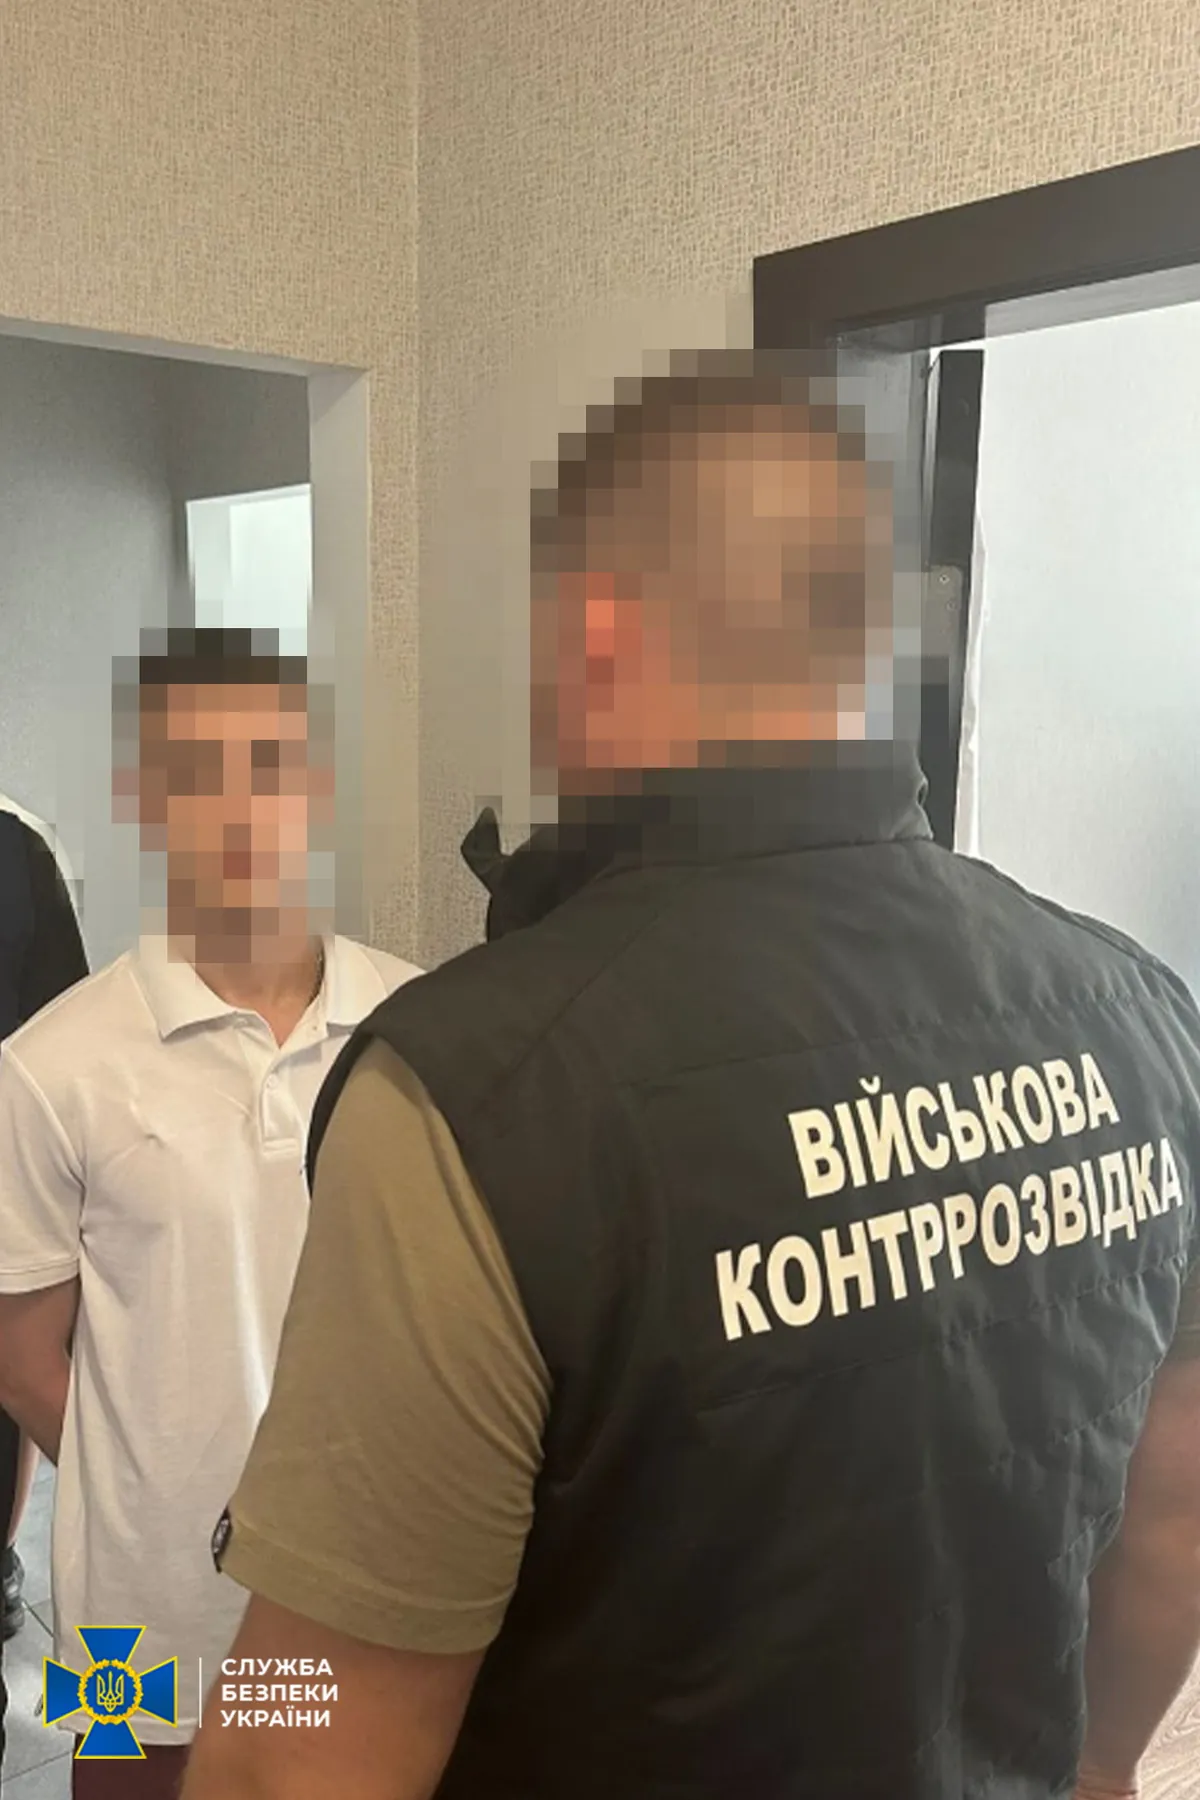 Khmelnytskyi region detains leader of gang that set fire to TCC cars on Russia's order